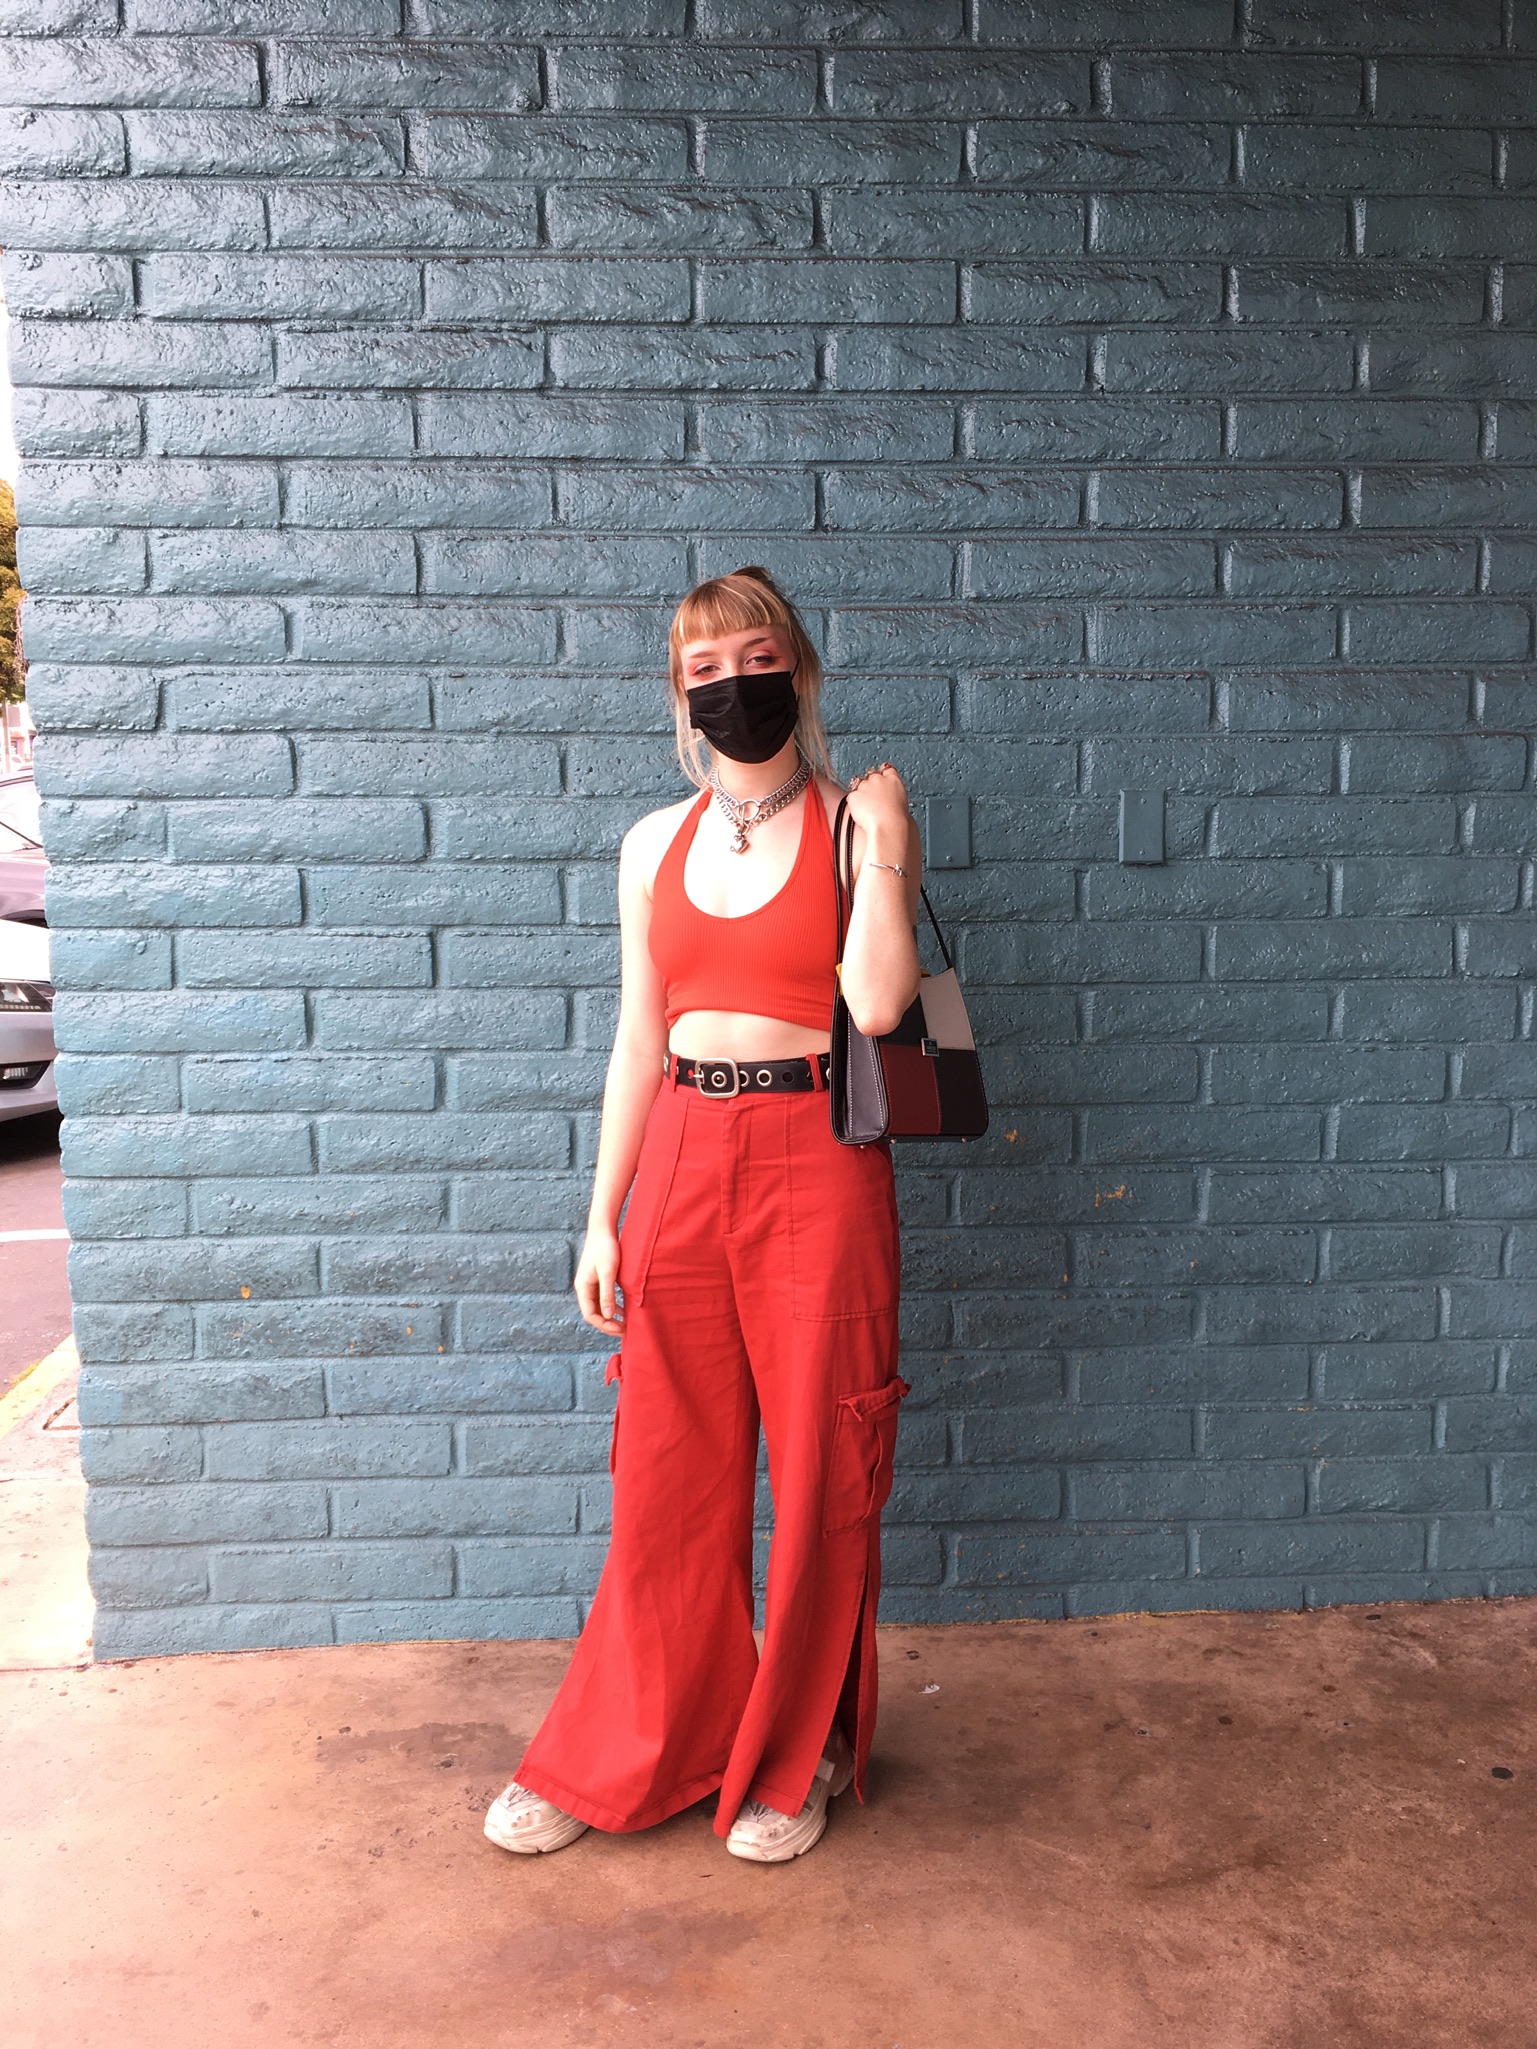 Person in a red halter top, silver chain necklace, red cargo pants and patchwork leather shoulder bag